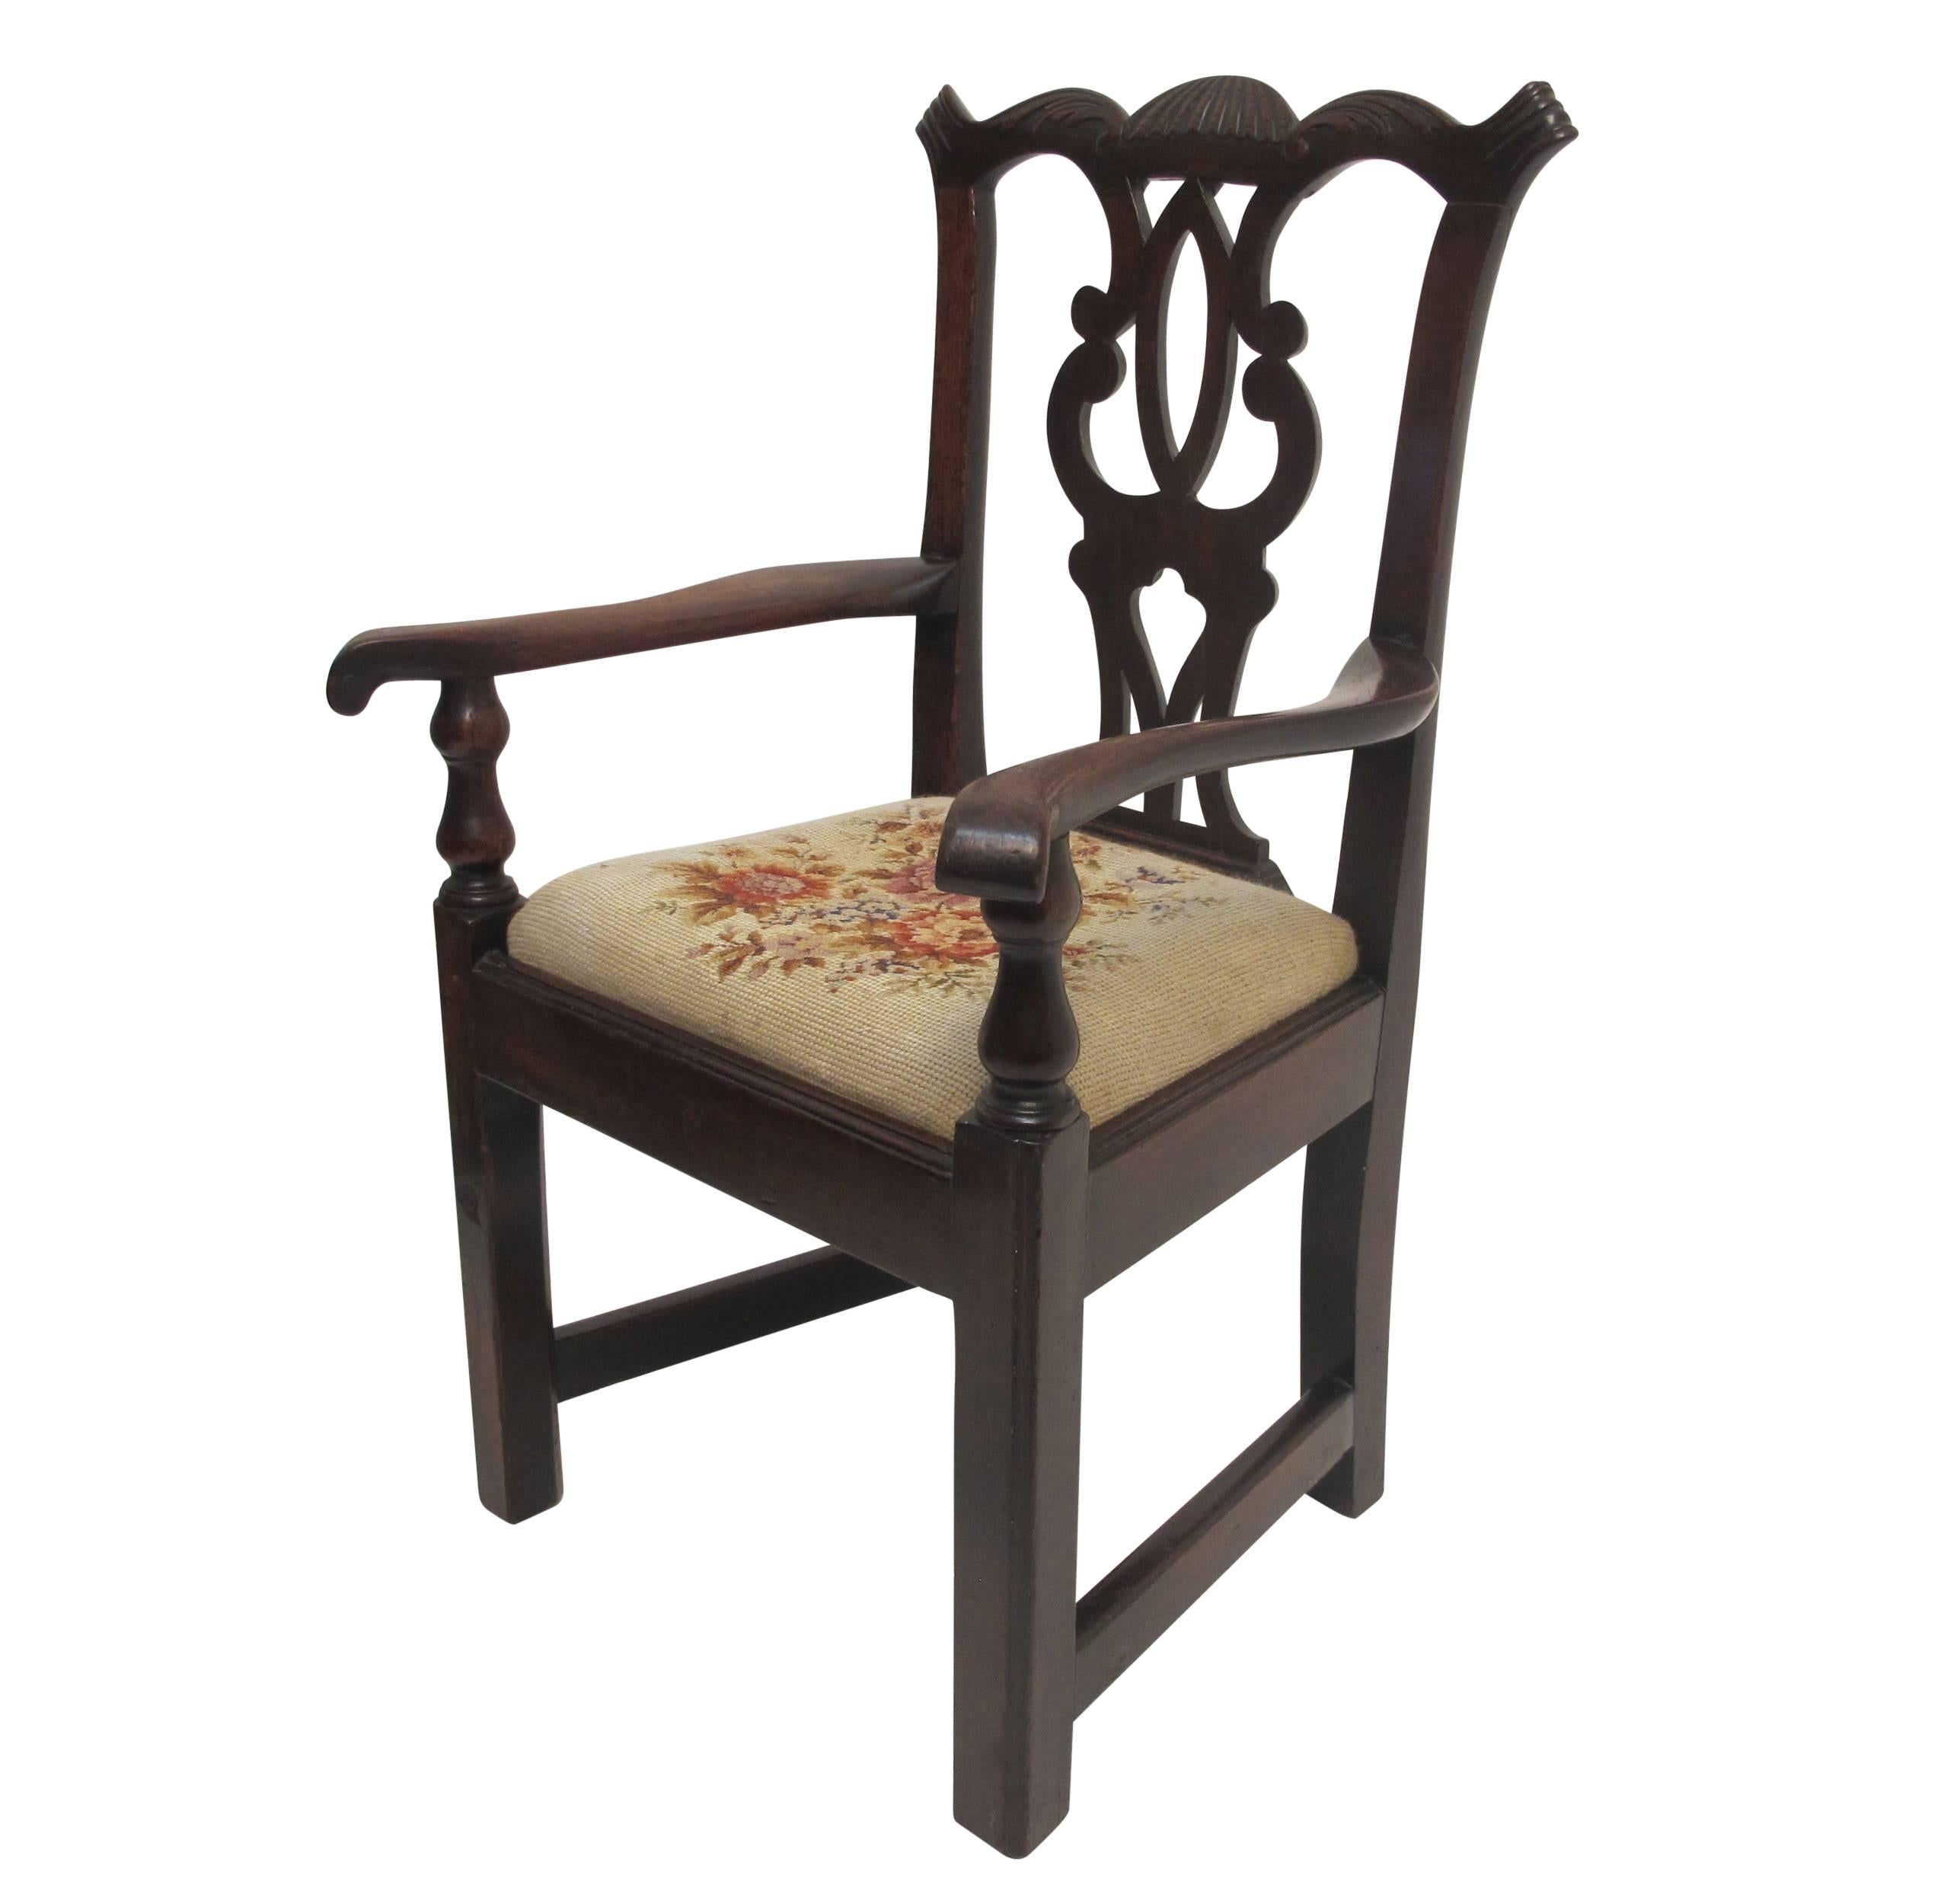 A miniature to scale mahogany Chippendale chair with needlepoint seat. Child size chair or possibly an apprentice or cabinet makers sample, England, 19th century.